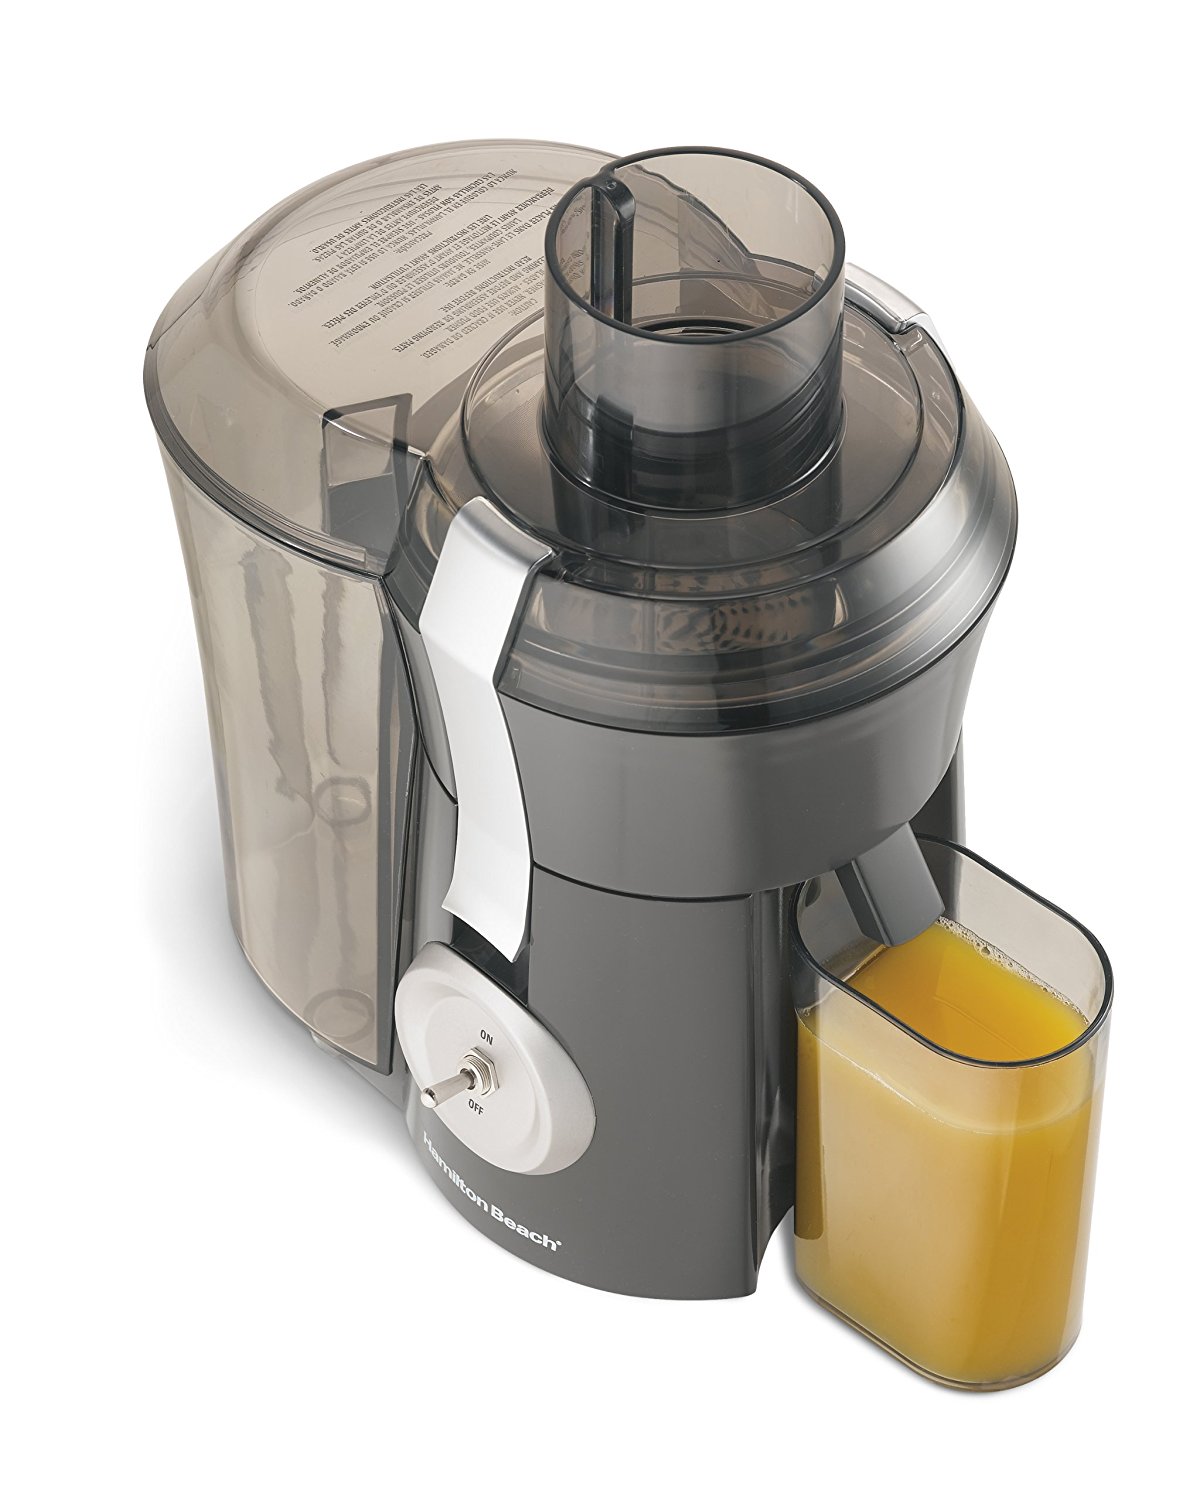 Normally $75, this juice extractor is 45 percent off (Photo via Amazon)